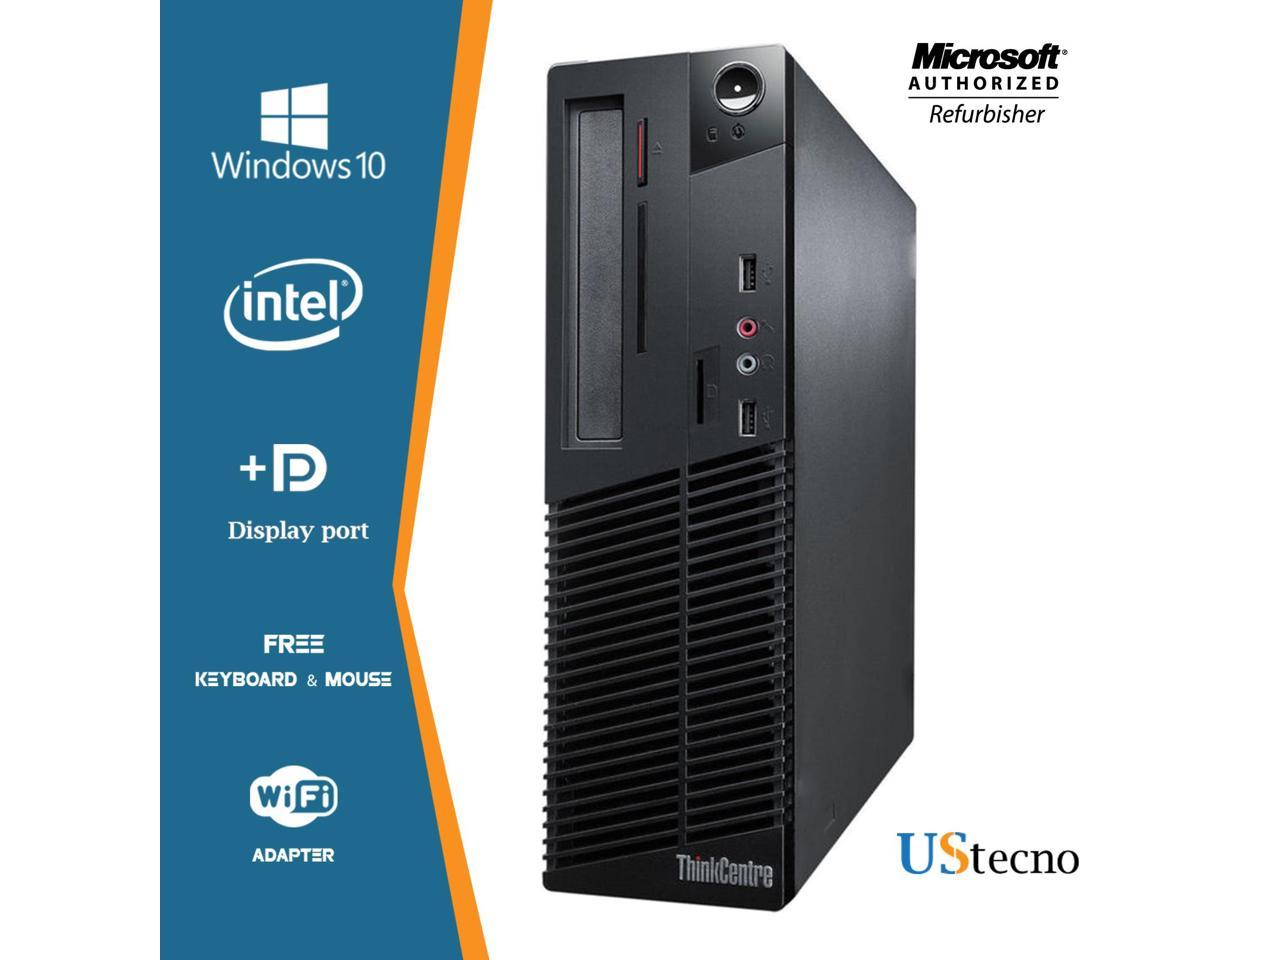 Lenovo Thinkcentre M91P SFF Desktop Computer Intel Core i7 2600 16GB 1TB HDD DVD Windows 10 Professional New Free Keyboard, Mouse,Power cord,WiFi Adapter